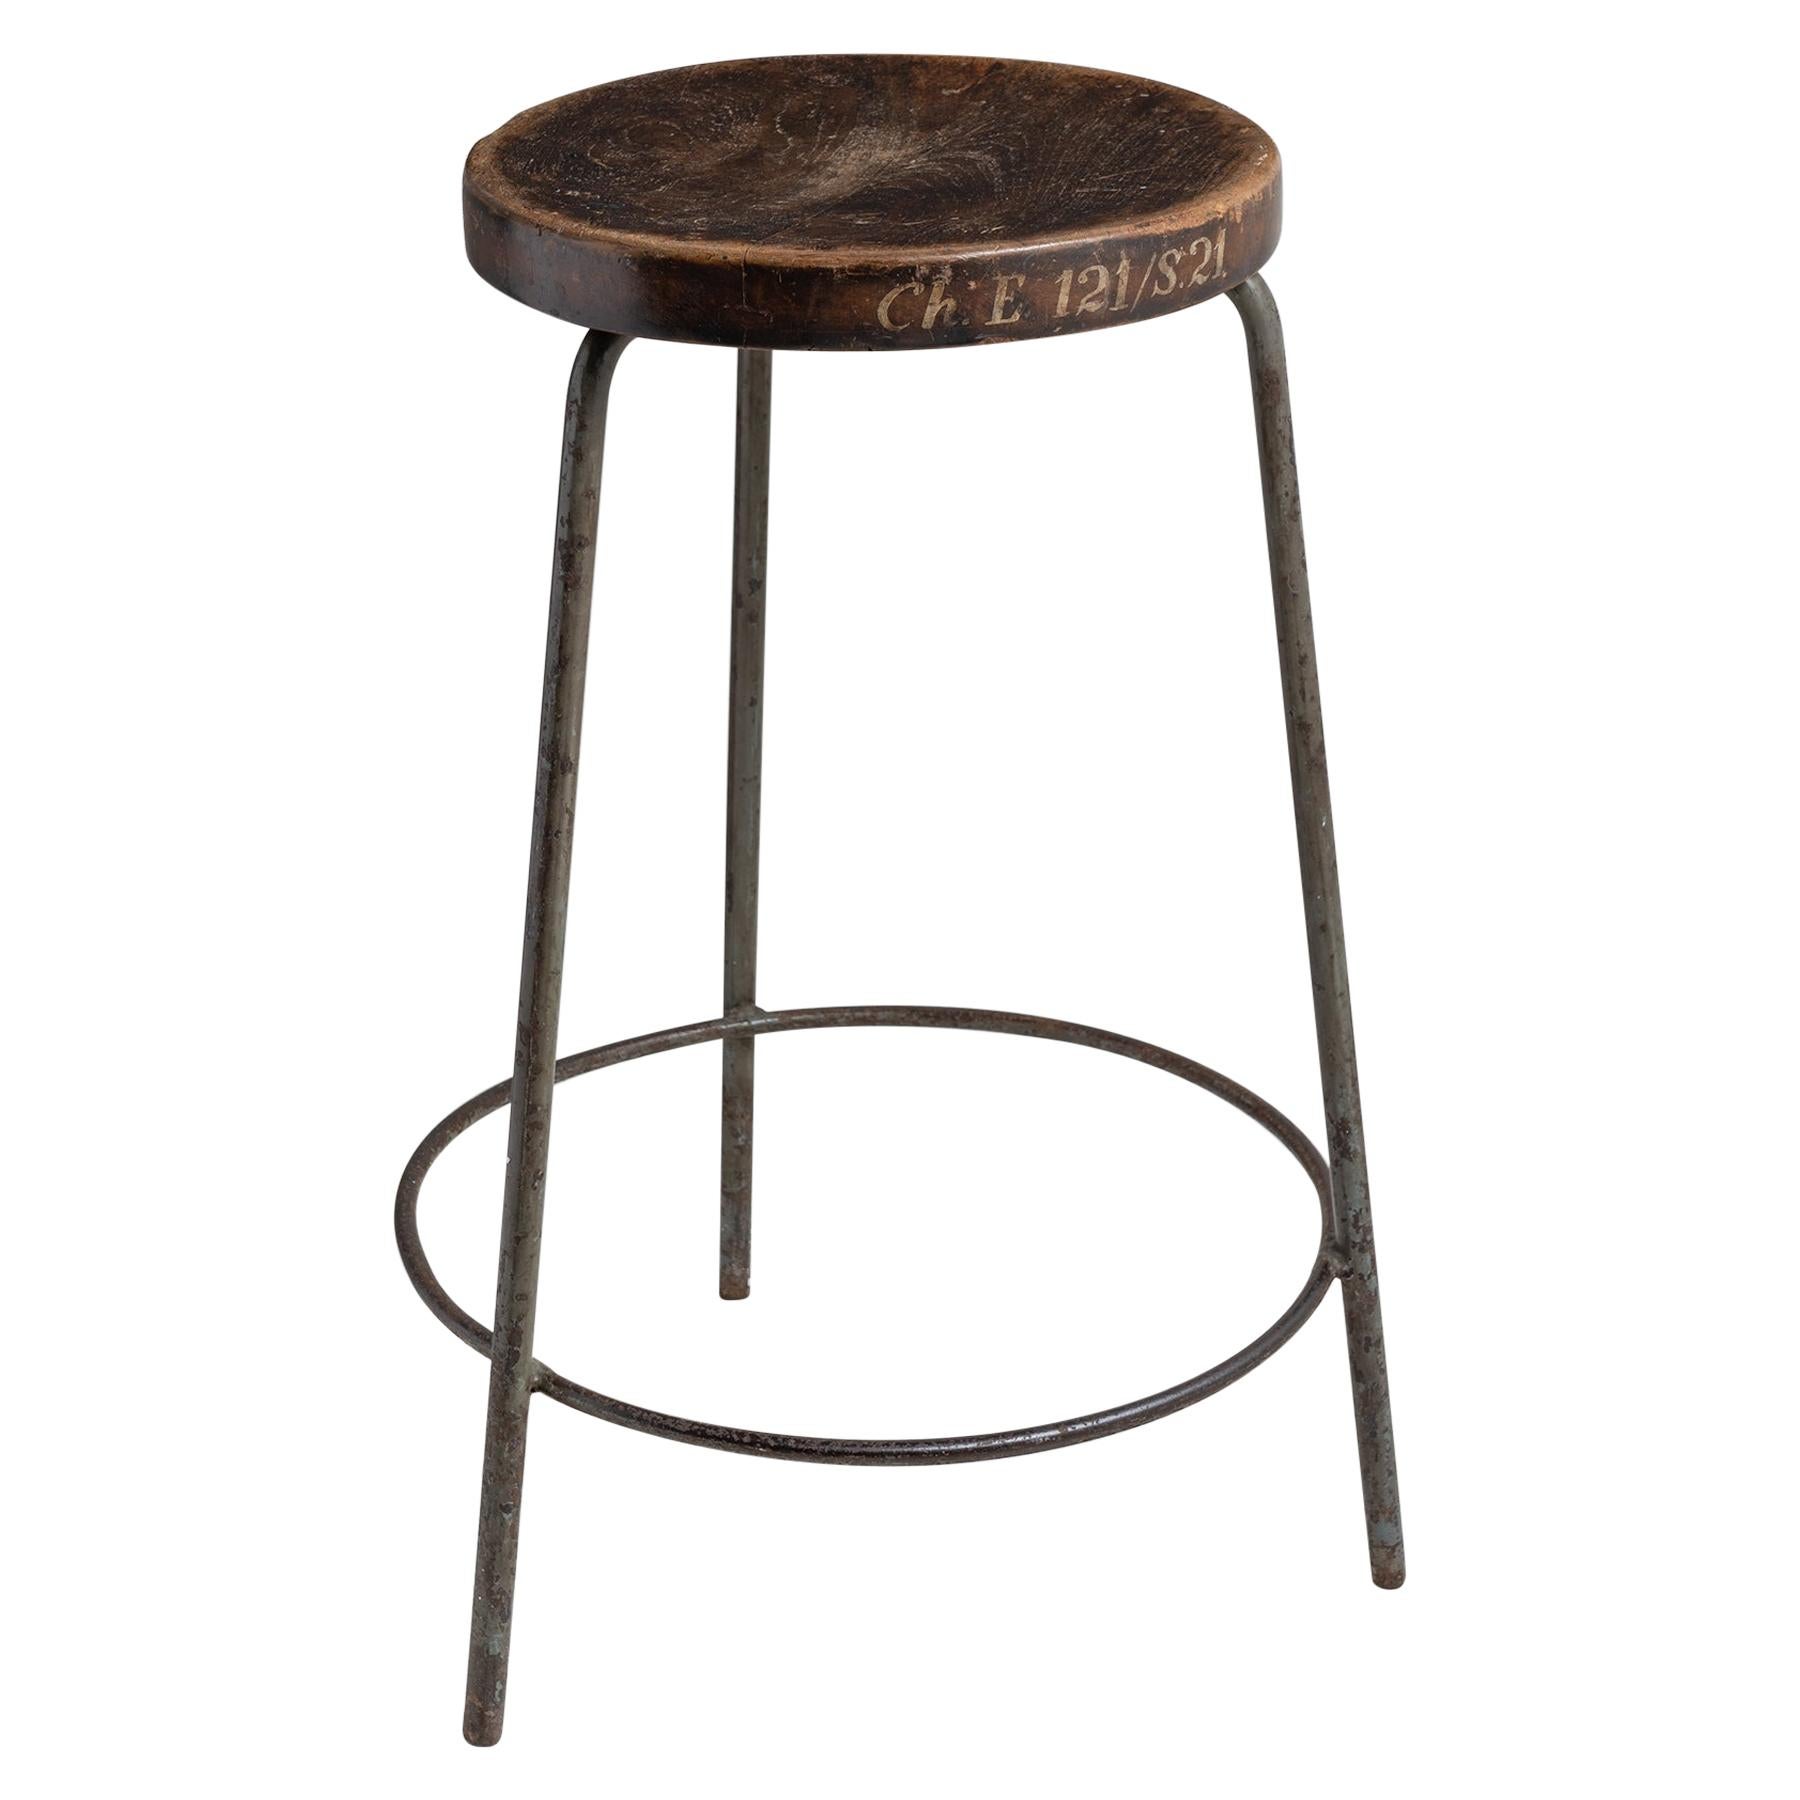 Three-legged painted iron and teak stool from the School of Chemical engineering. With concave seat, all in original finish. Hand painted with classroom and seat number.